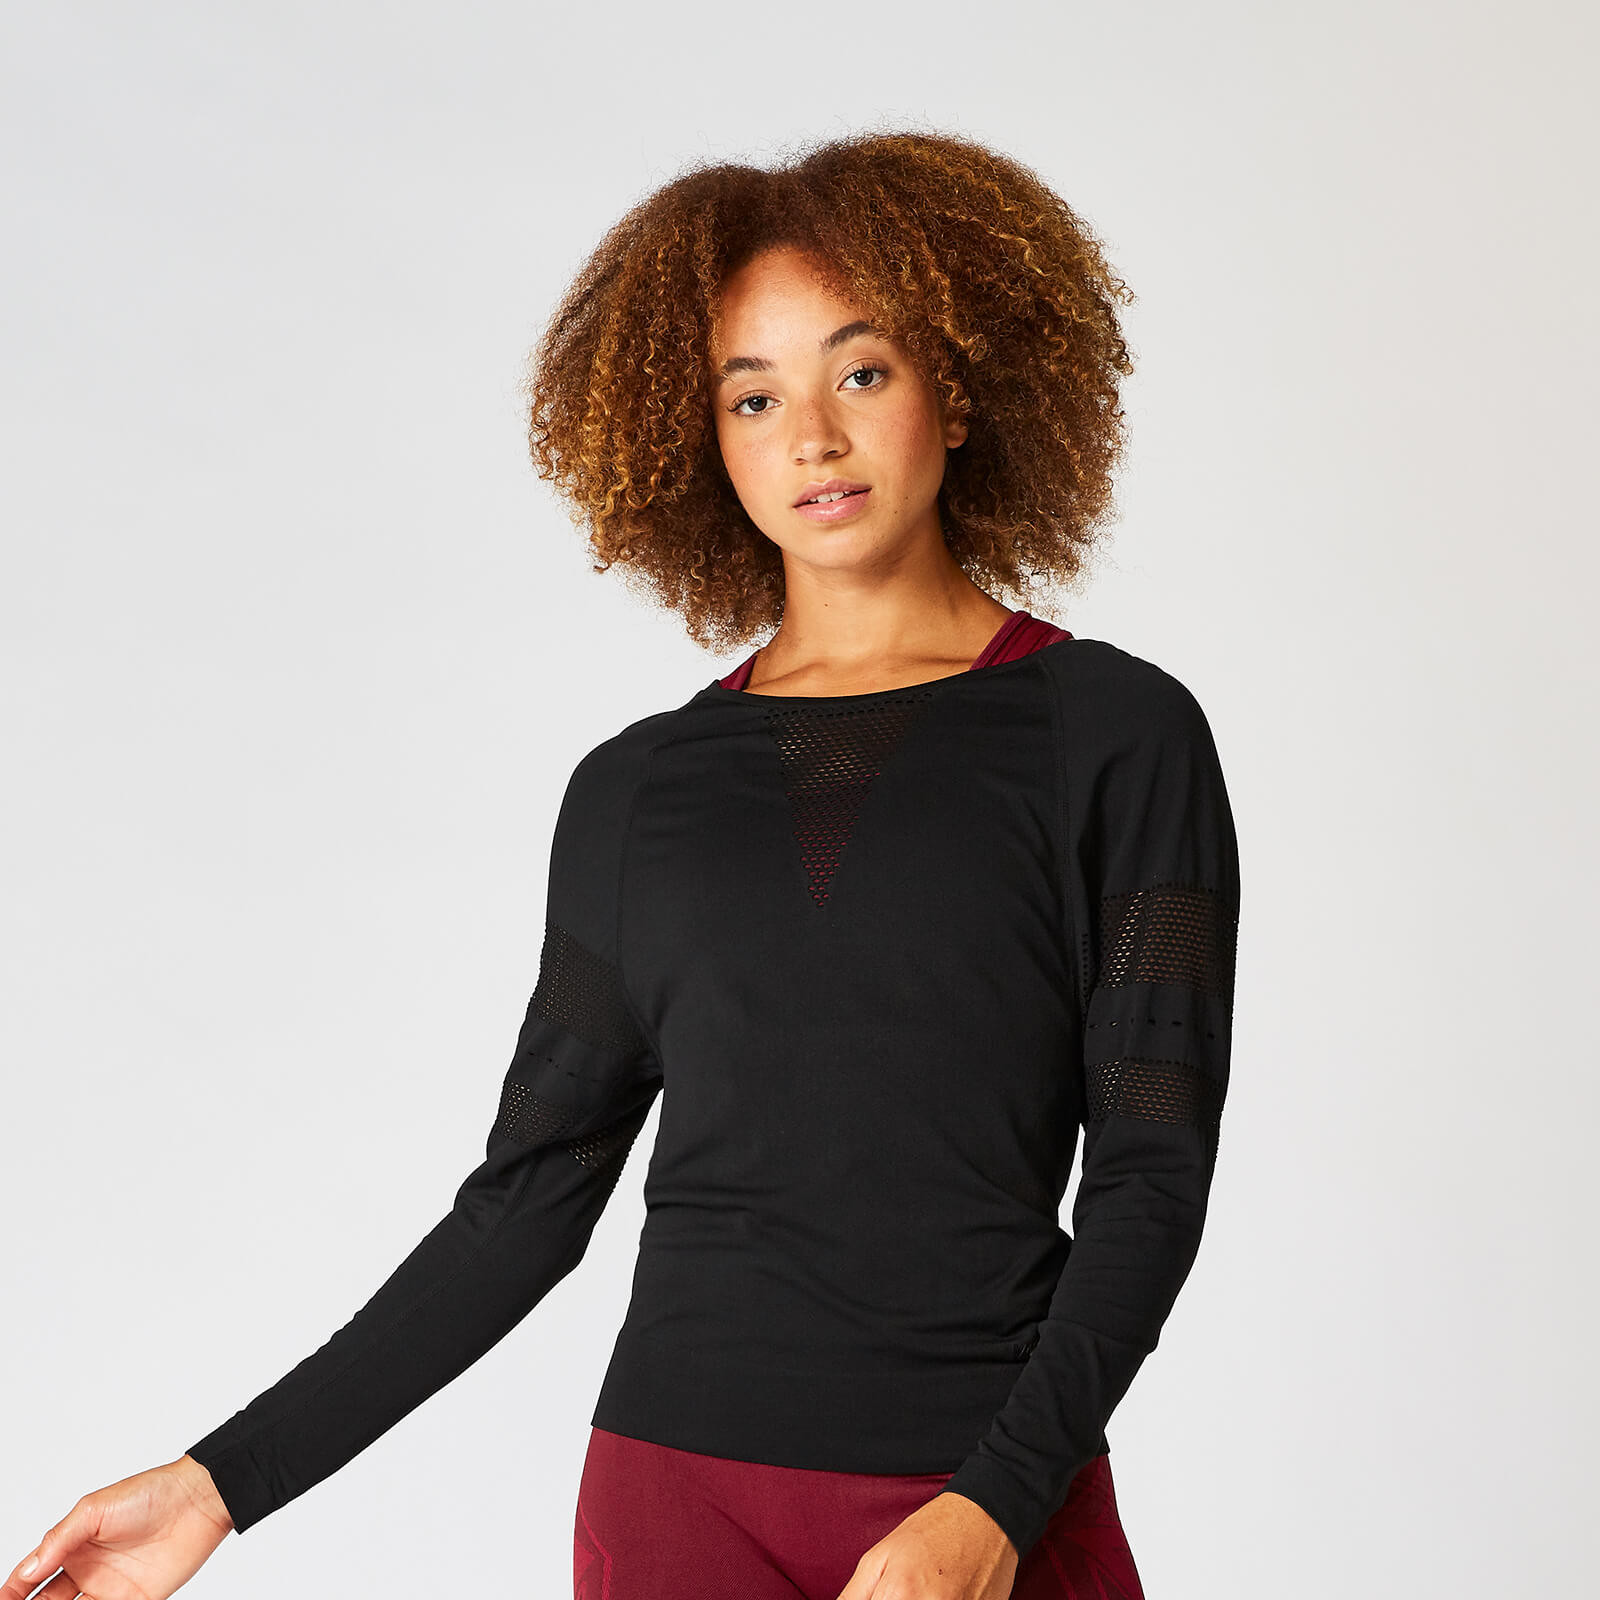 MP Shape Seamless Loose Fit Long Sleeve Top - Black - XS